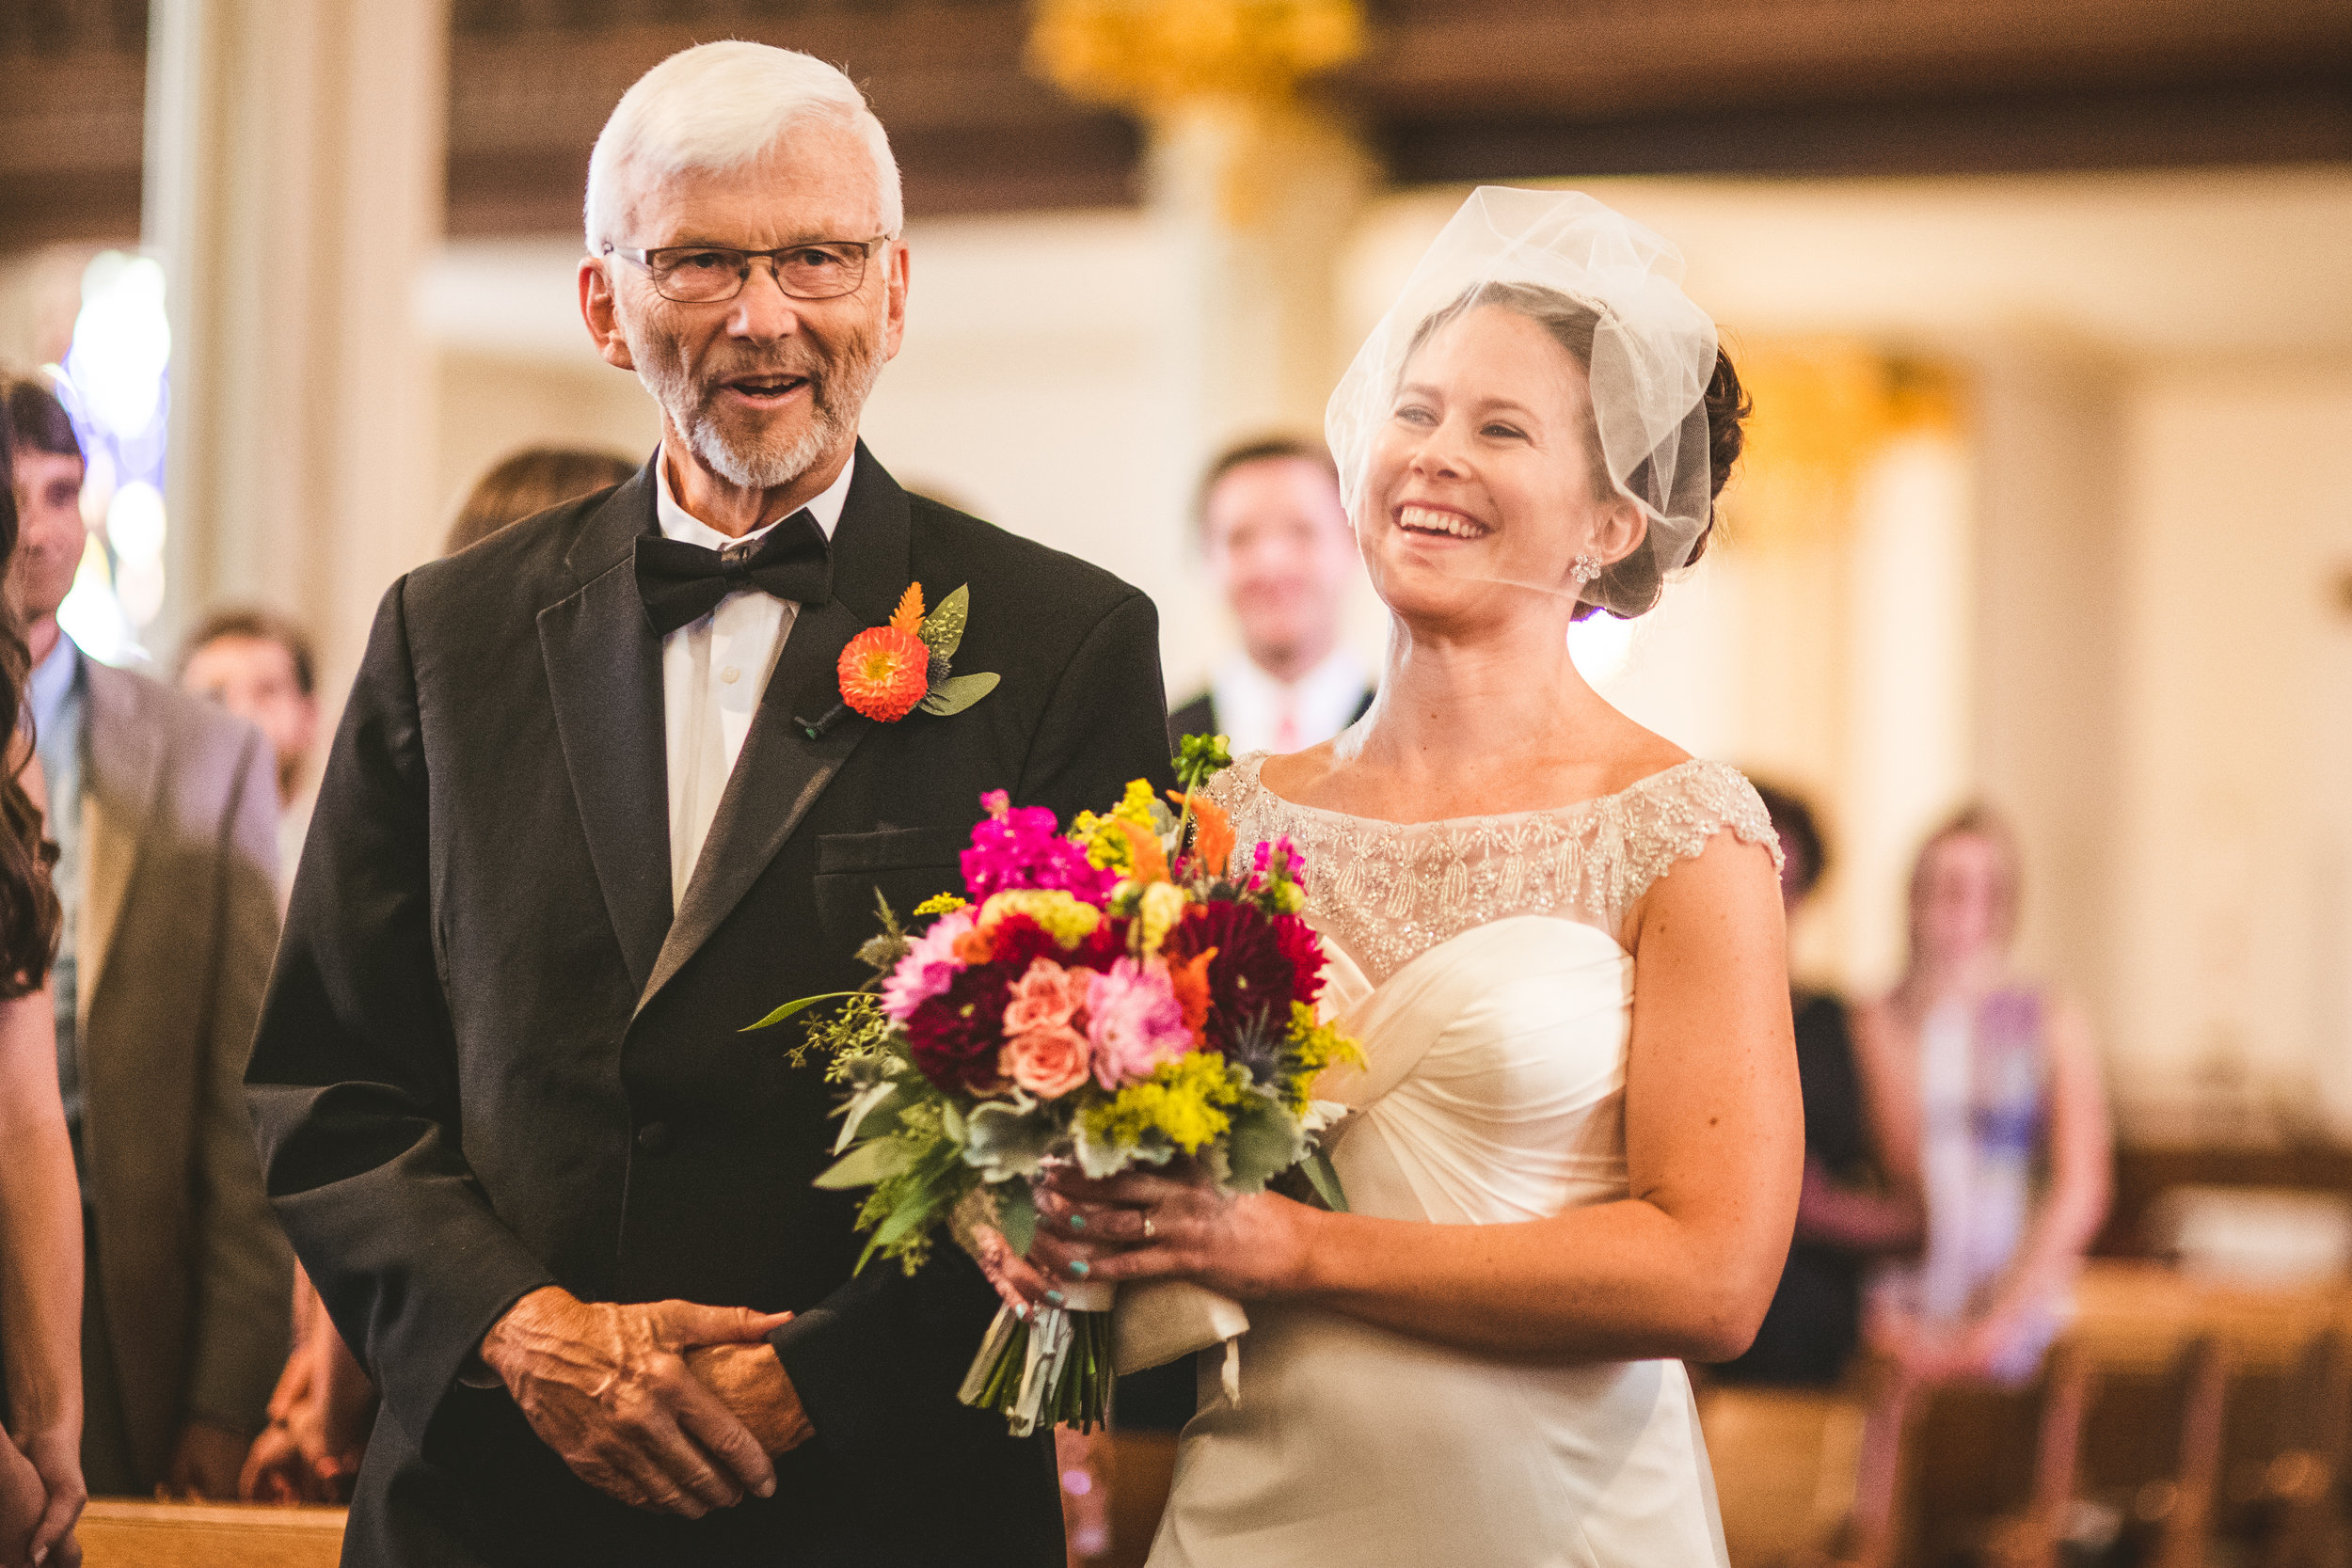 Bride holding vibrantly colored bouquet with her father at her side wearing an orange boutonniere